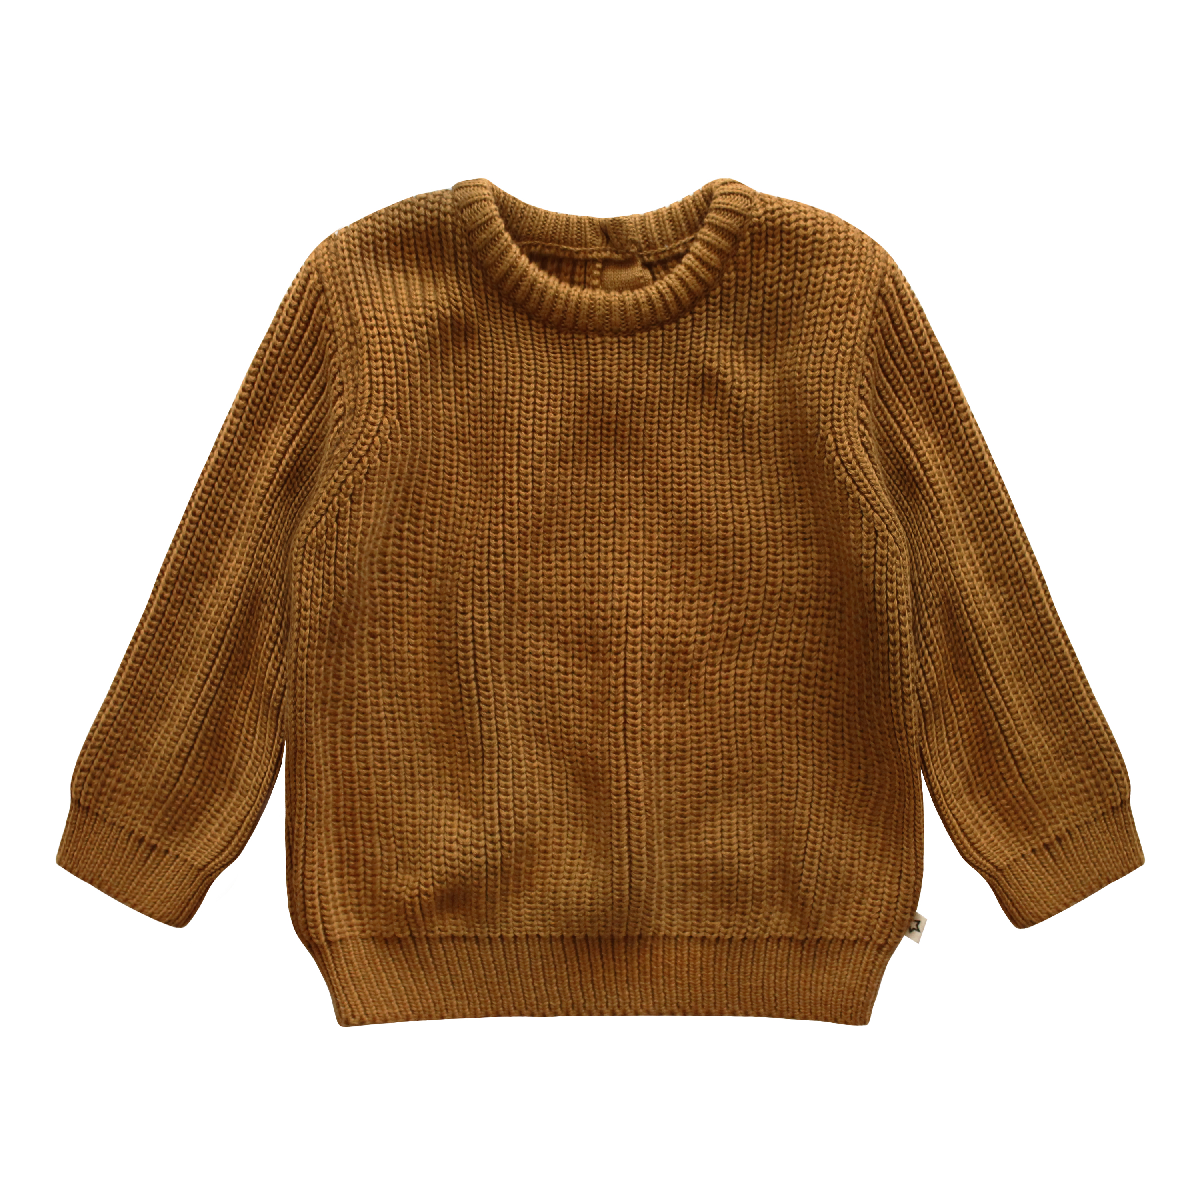 Your Wishes Sweater Plain Knit | Andel